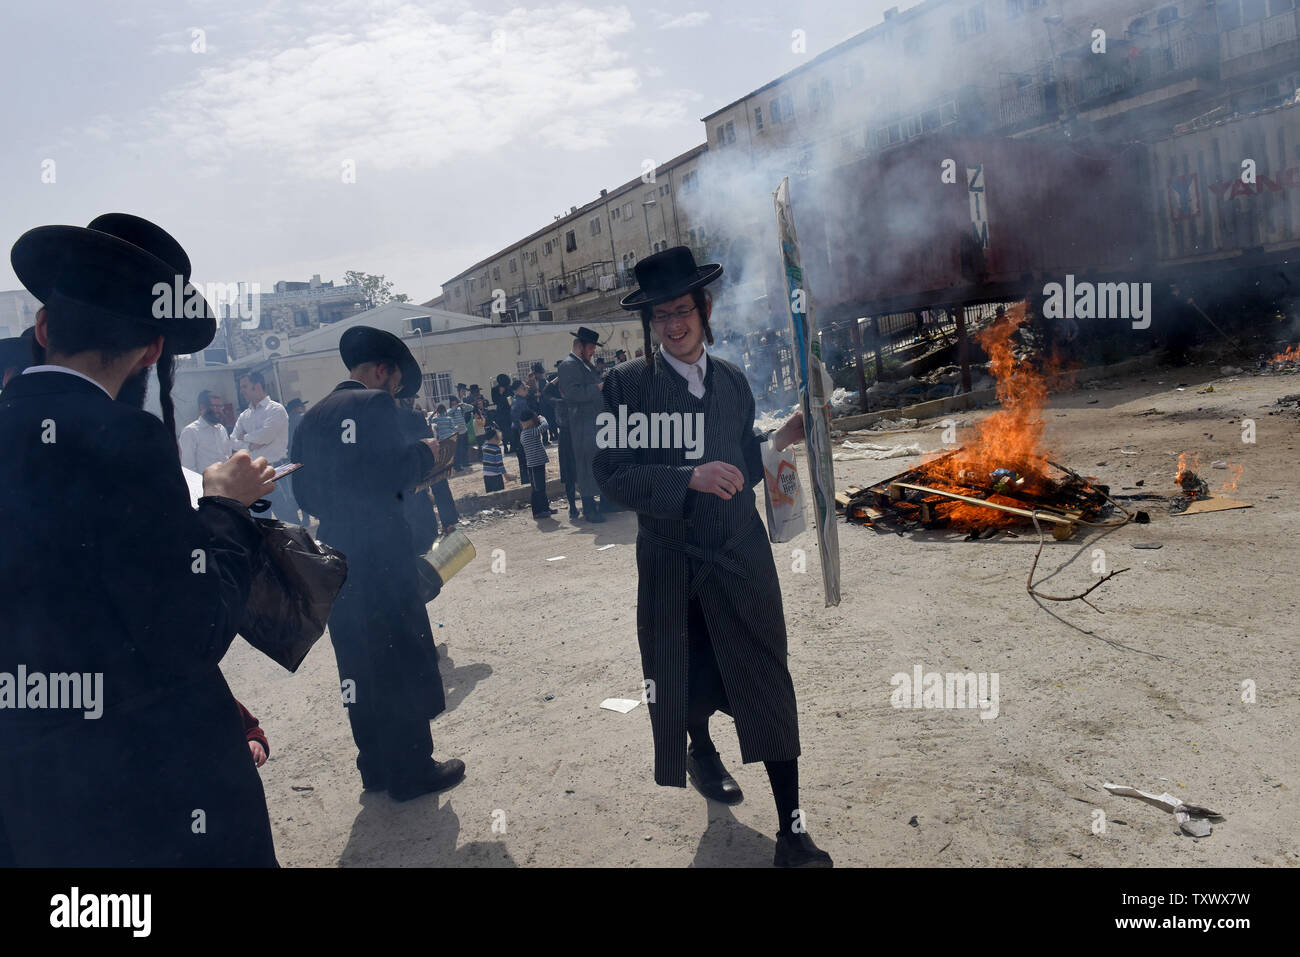 Ultra-Orthodox Jews burn leaven food products in preparation for the Jewish holiday of Passover in the Mea Shearim neighborhood in Jerusalem, Israel, April 10, 2017. Jews eat matzah, unleavened bread, during the eight days of Passover that celebrates the Biblical story of the exodus of the Israelites from slavery in Egypt.  Photo by Debbie Hill/UPI Stock Photo